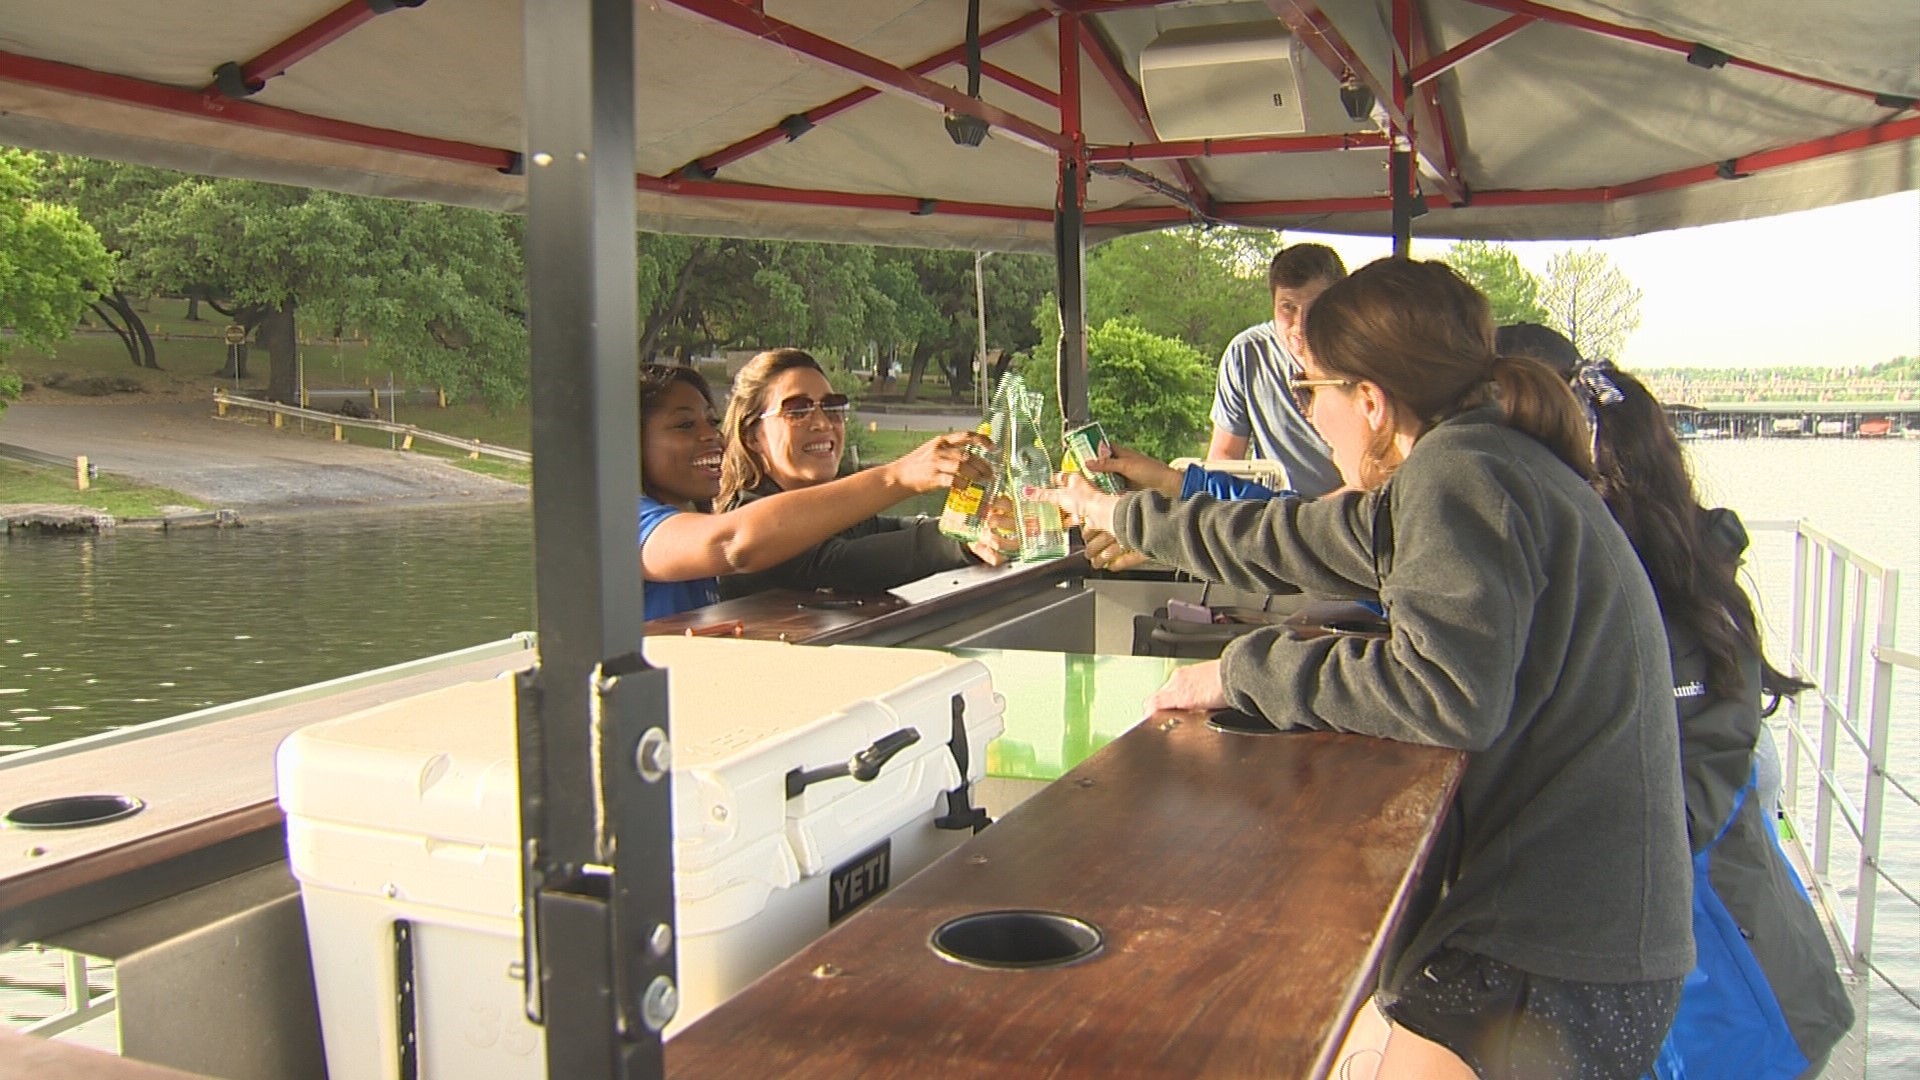 The Pedal Barge is Austin's first cycle boat. It's a party boat where you do the pedaling. You can explore Austin's waterways while pedaling and drinking with your friends.